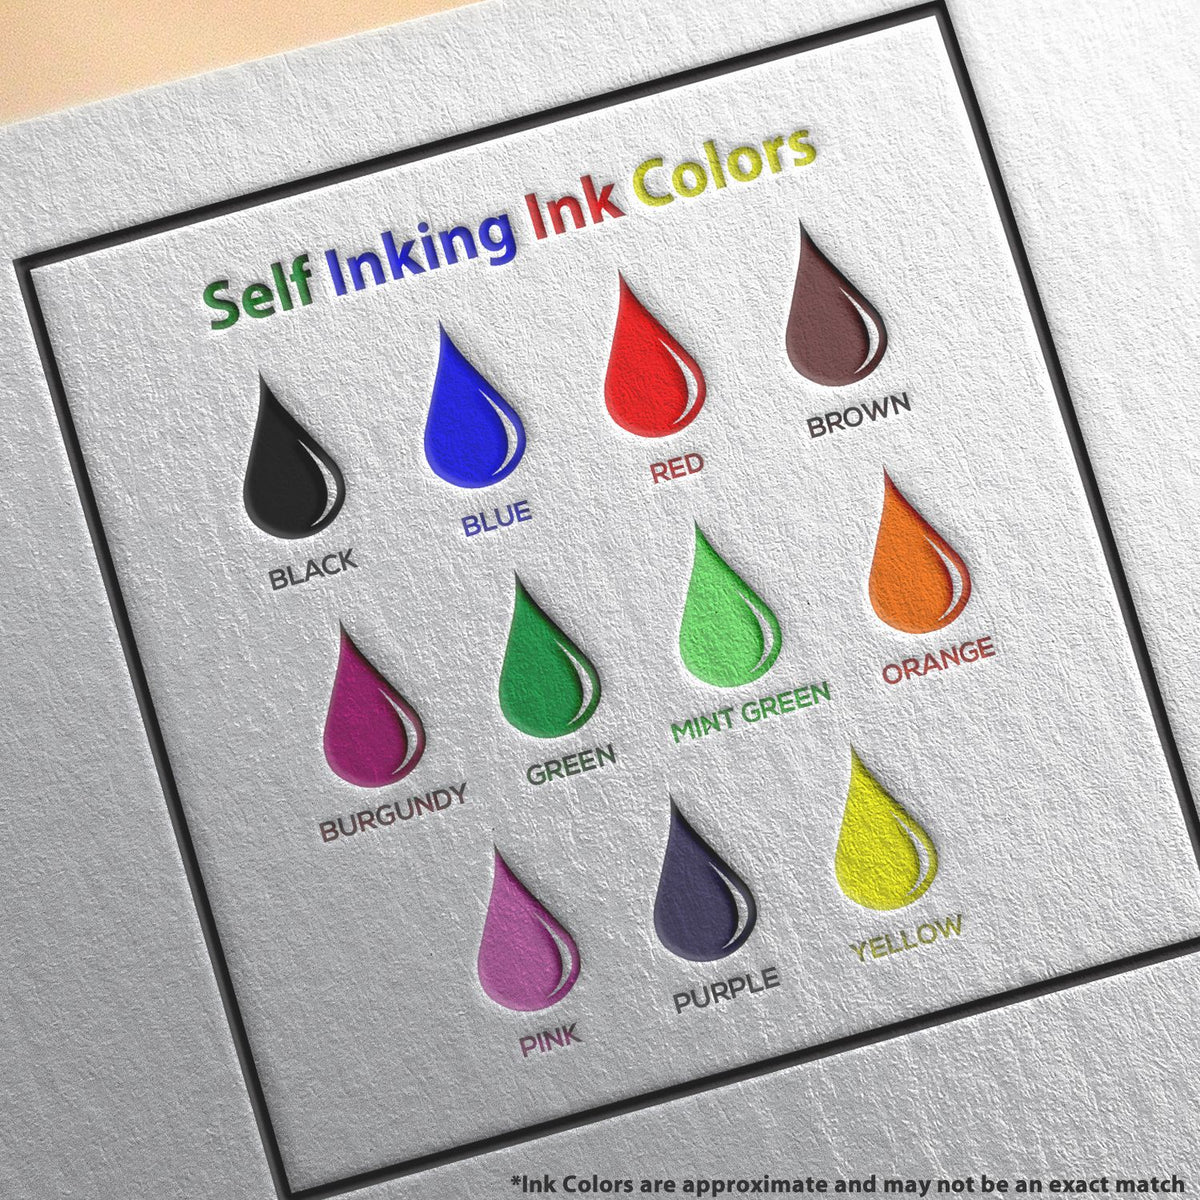 A picture showing the different ink colors or hues available for the Self-Inking North Dakota PE Stamp product.